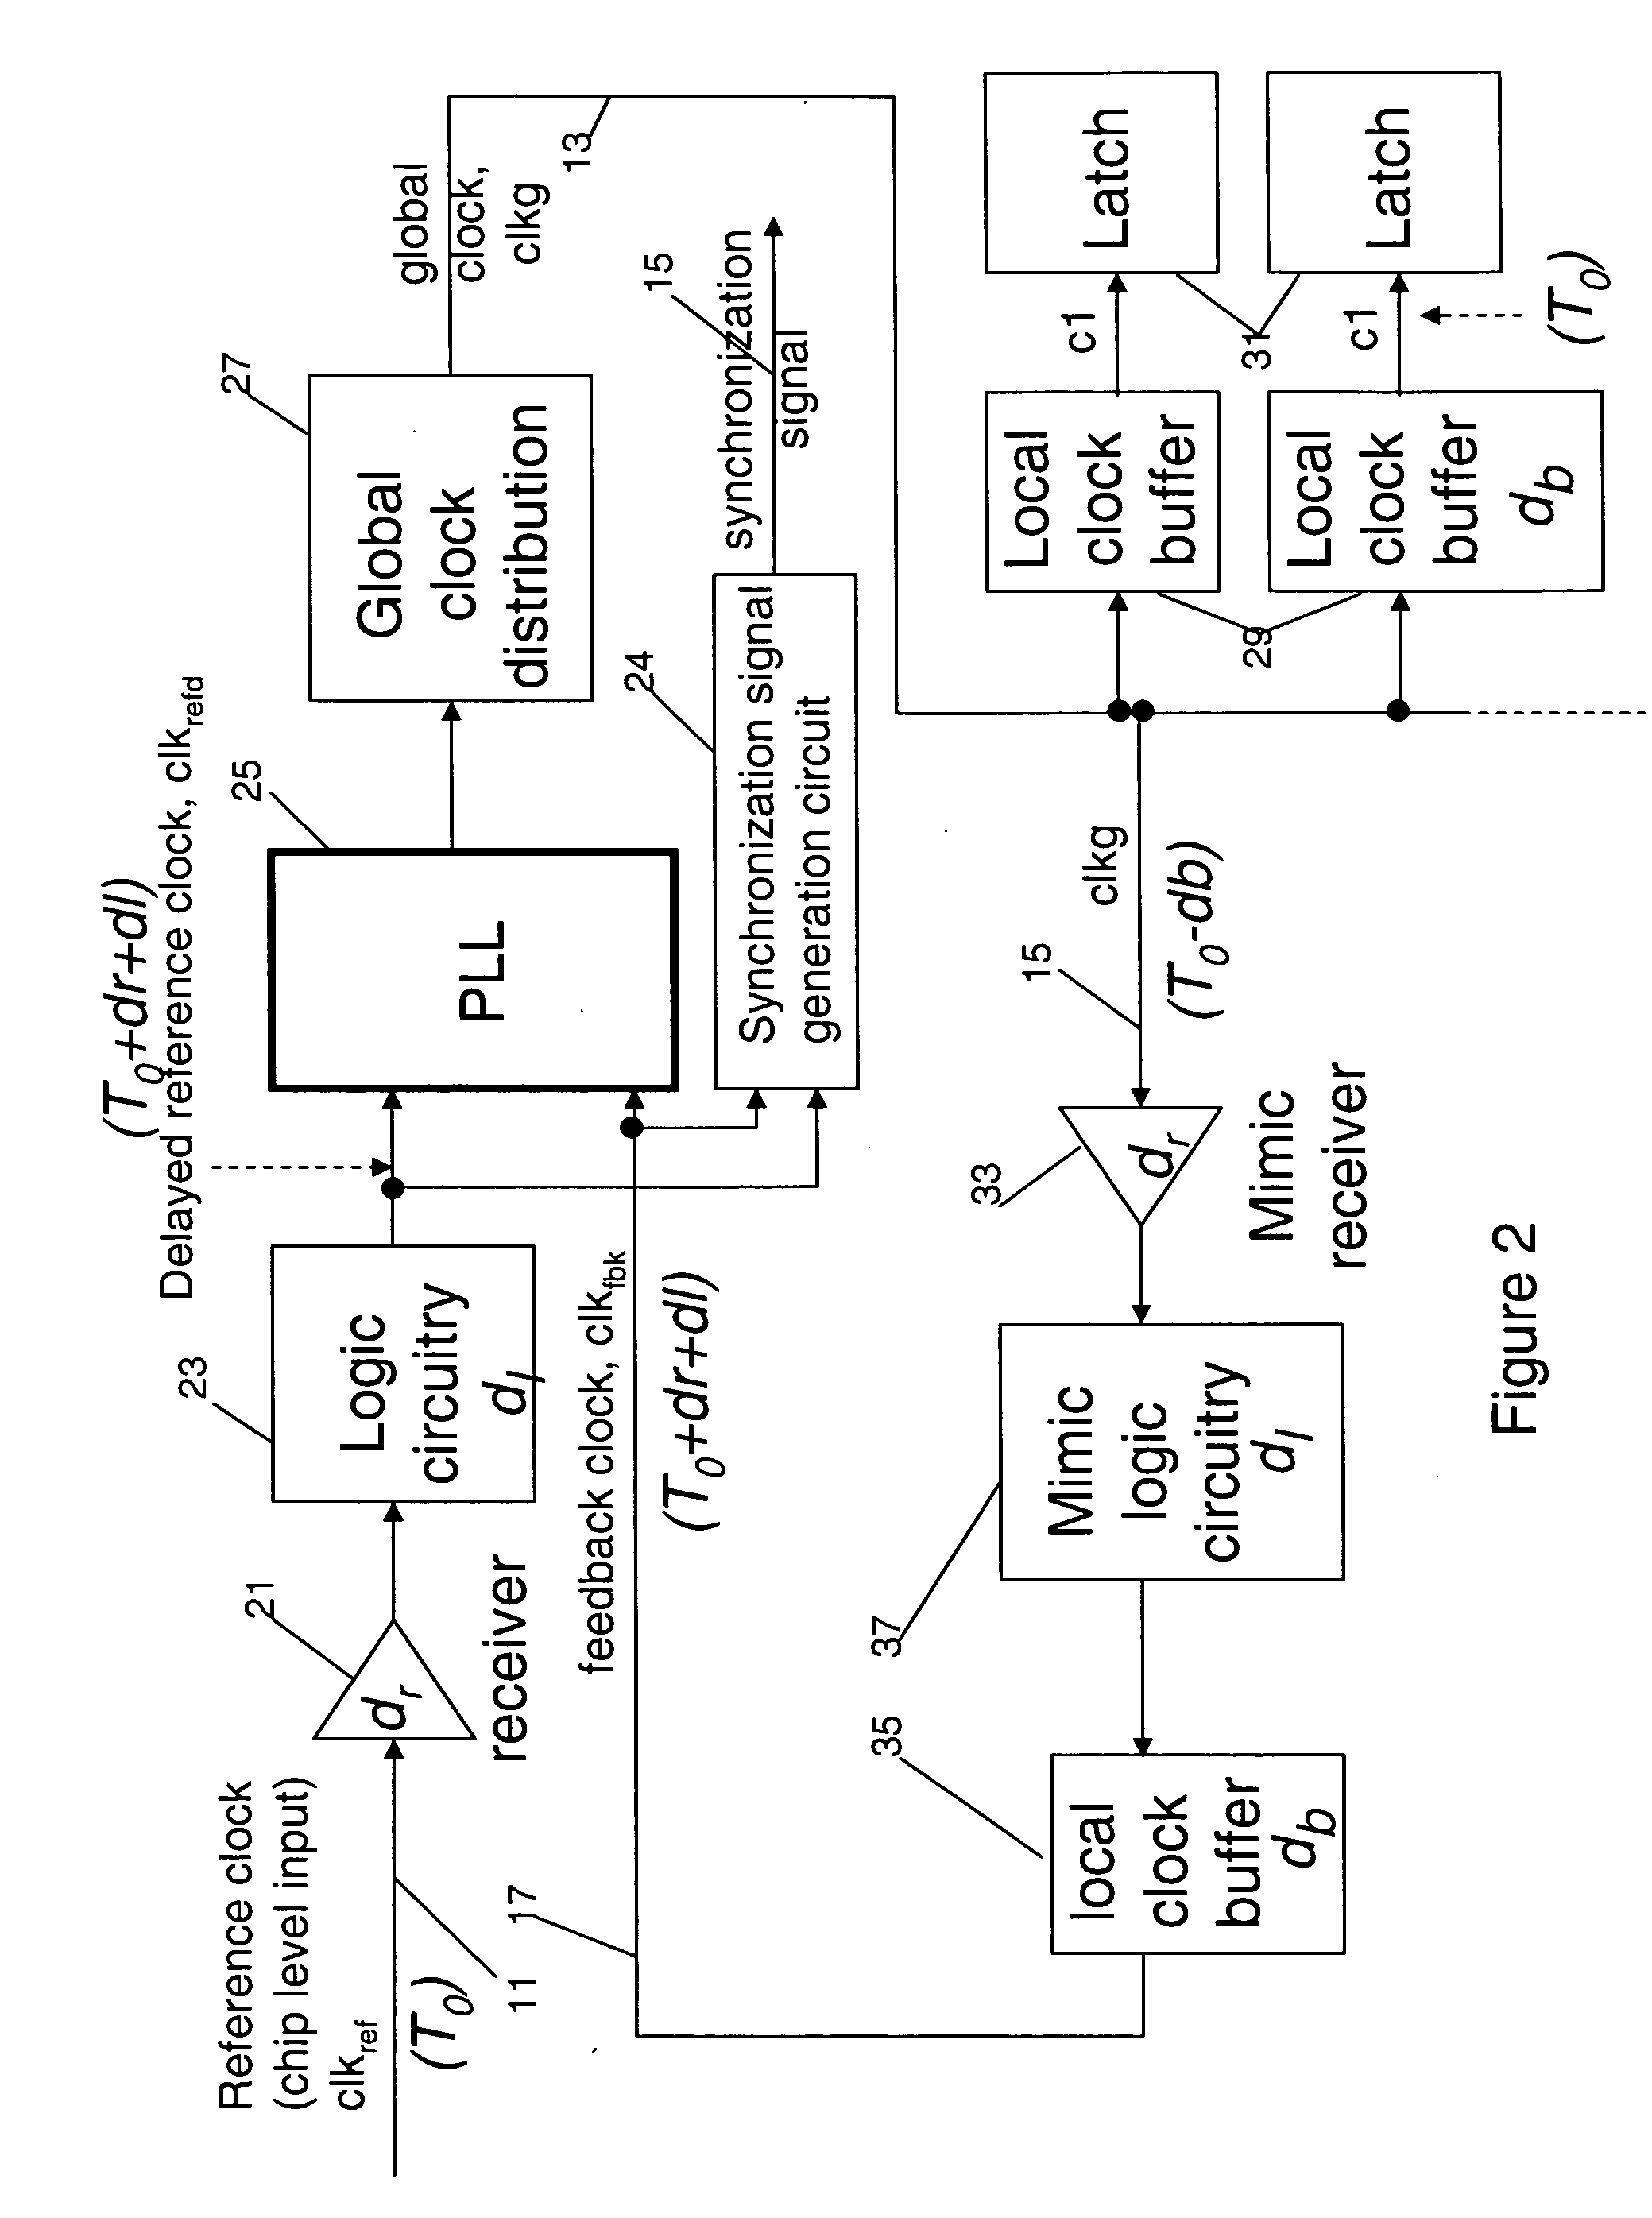 Method and apparatus for generating synchronization signals for synchronizing multiple chips in a system